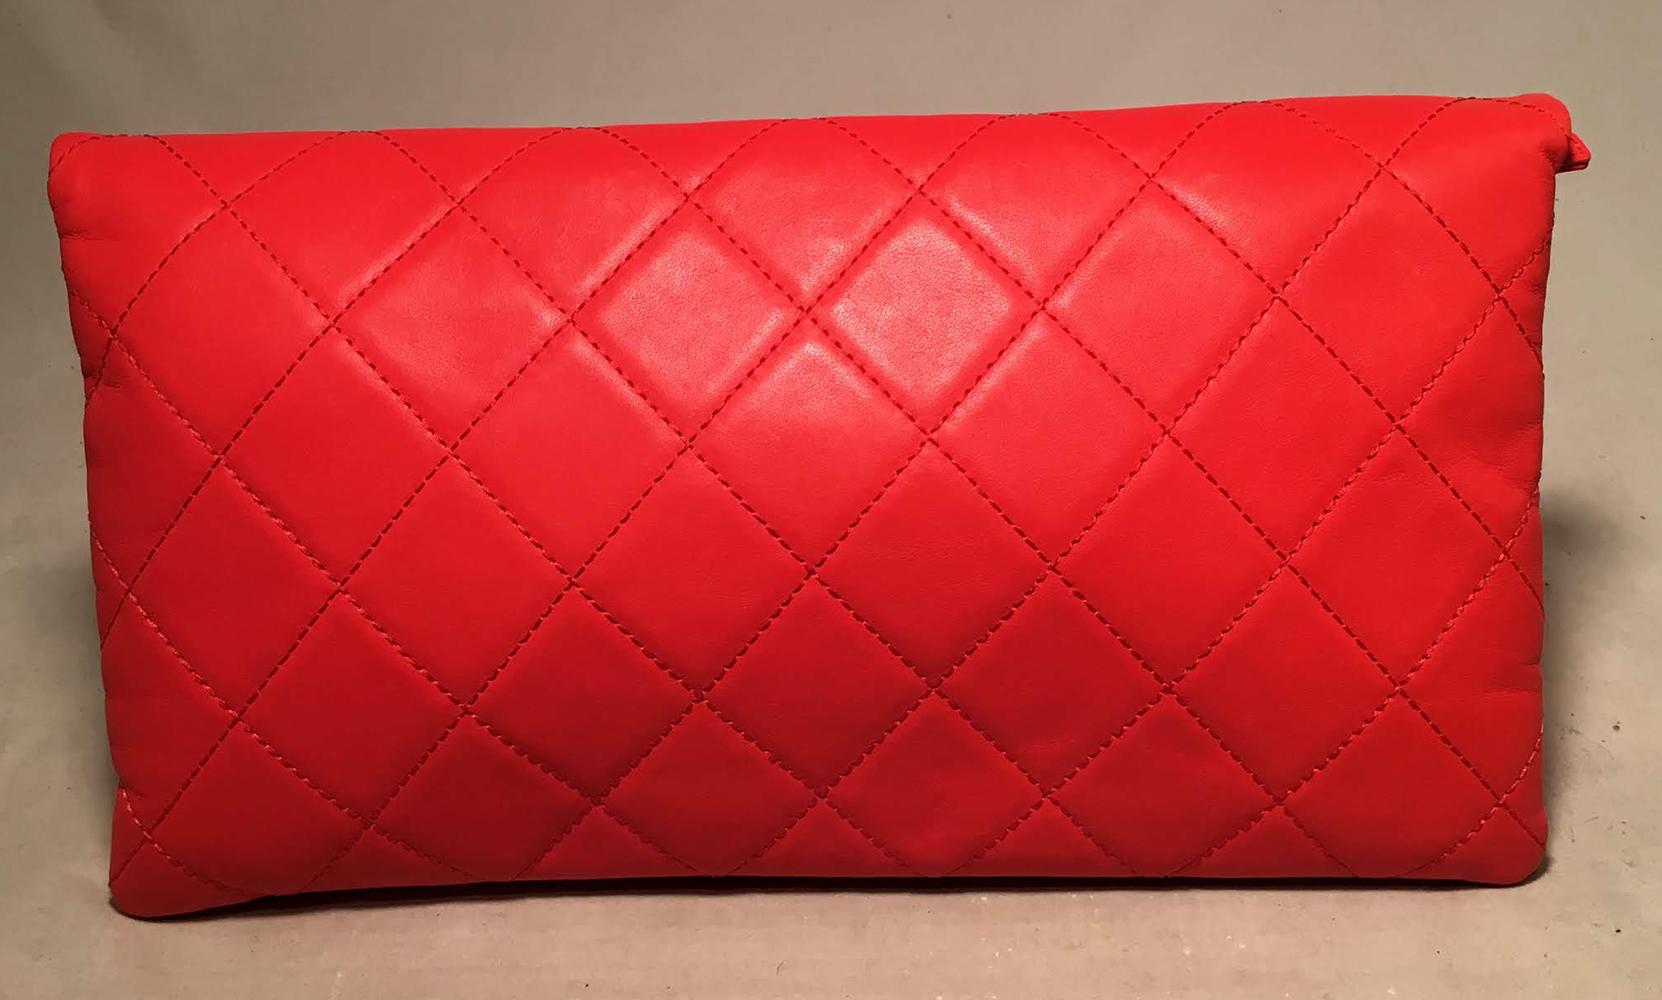 Chanel Red Quilted Leather CC Fold Over Clutch in excellent condition. Bright red quilted leather exterior trimmed with matte gold CC logo hardware along front top fold. Two interior zippered compartments lined with red nylon. No stains, smells or